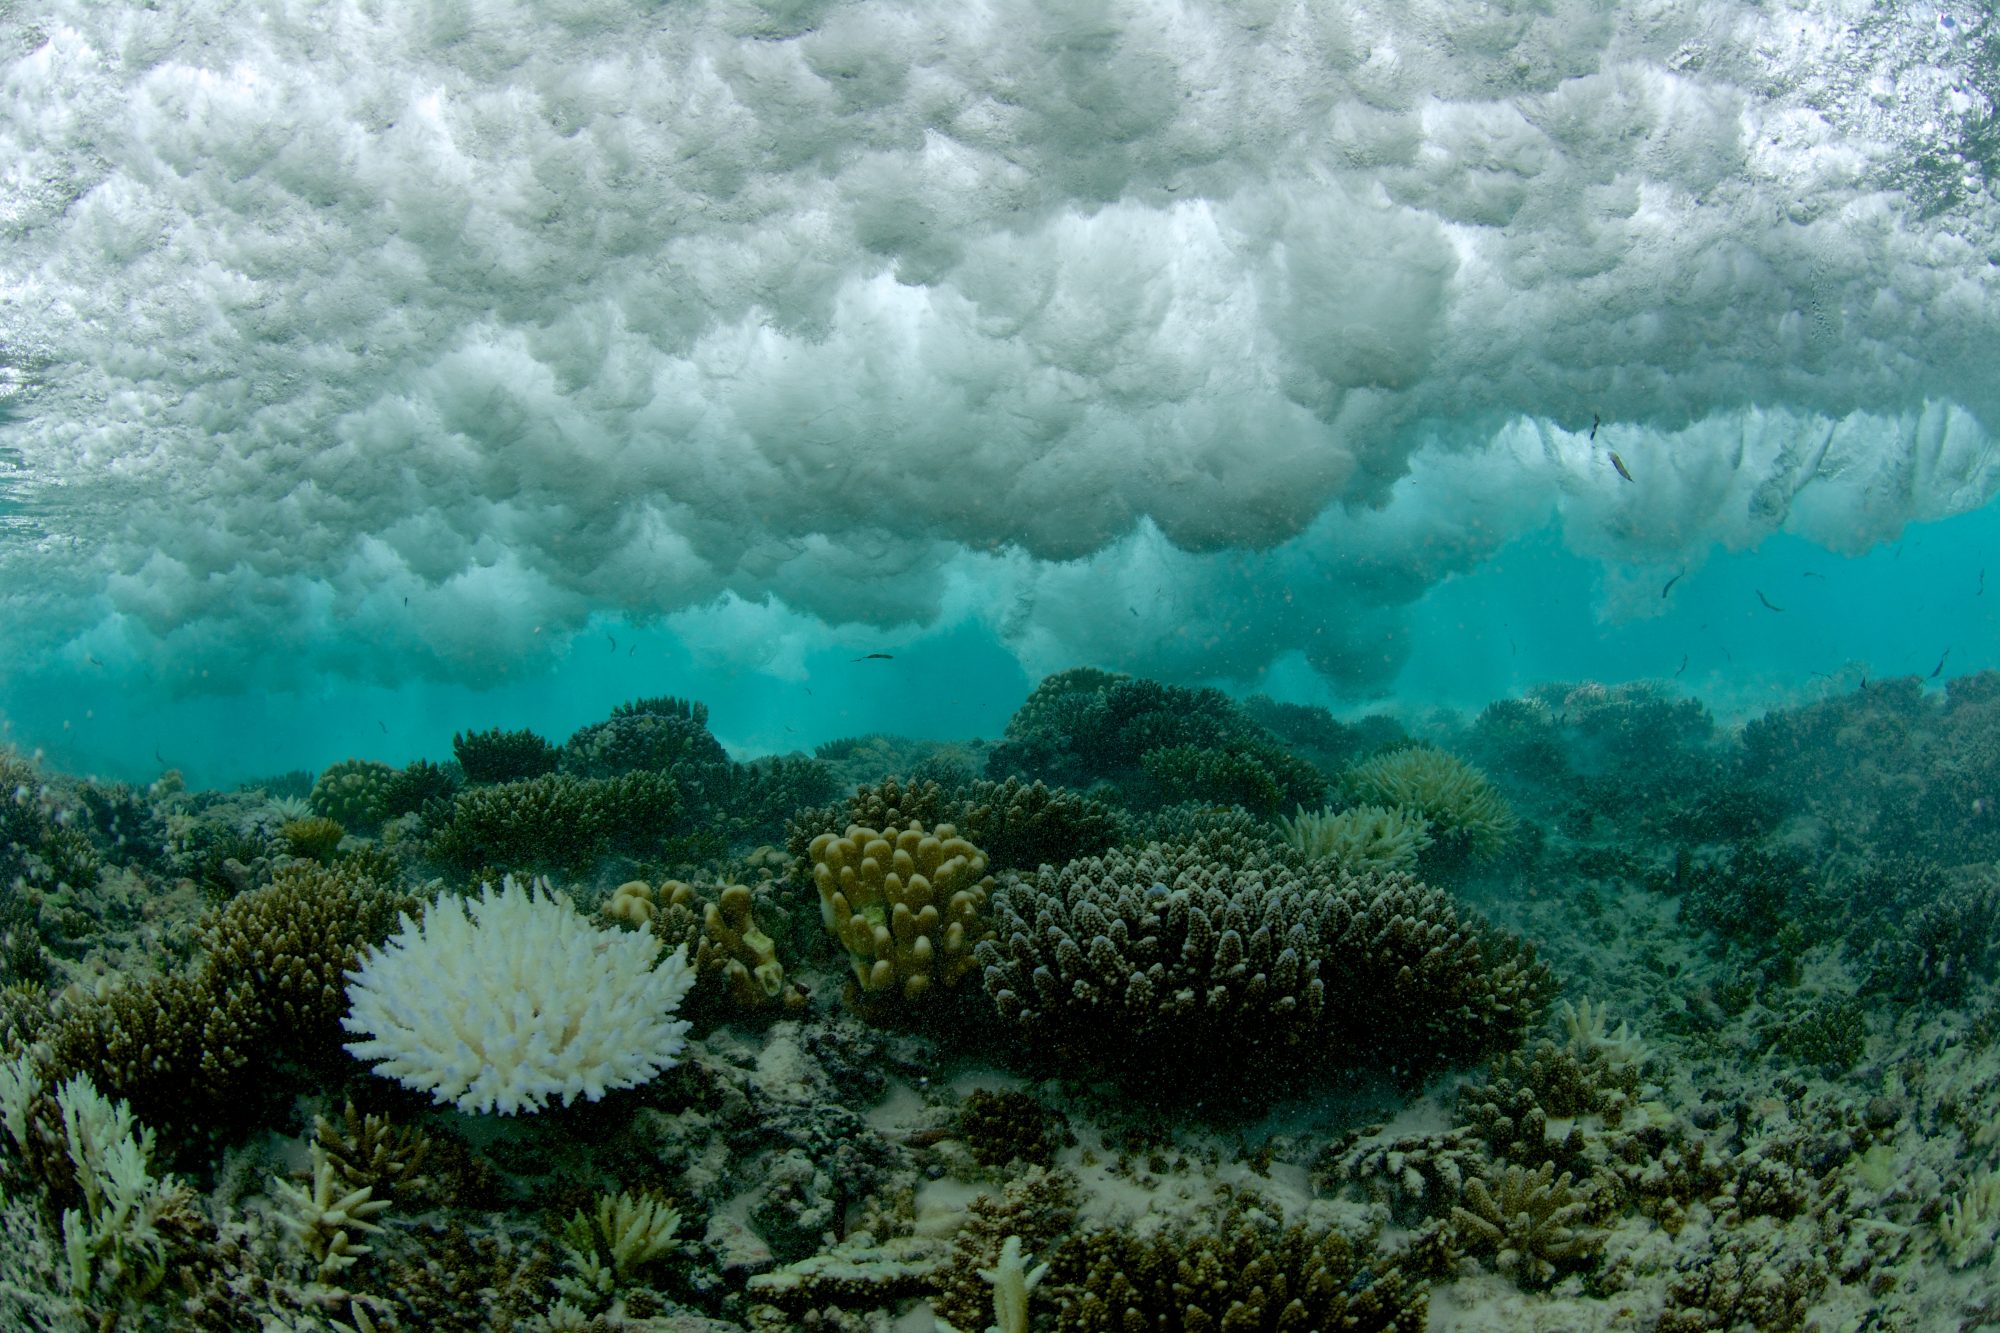 Dying Coral Reefs Impact Environment and Economy